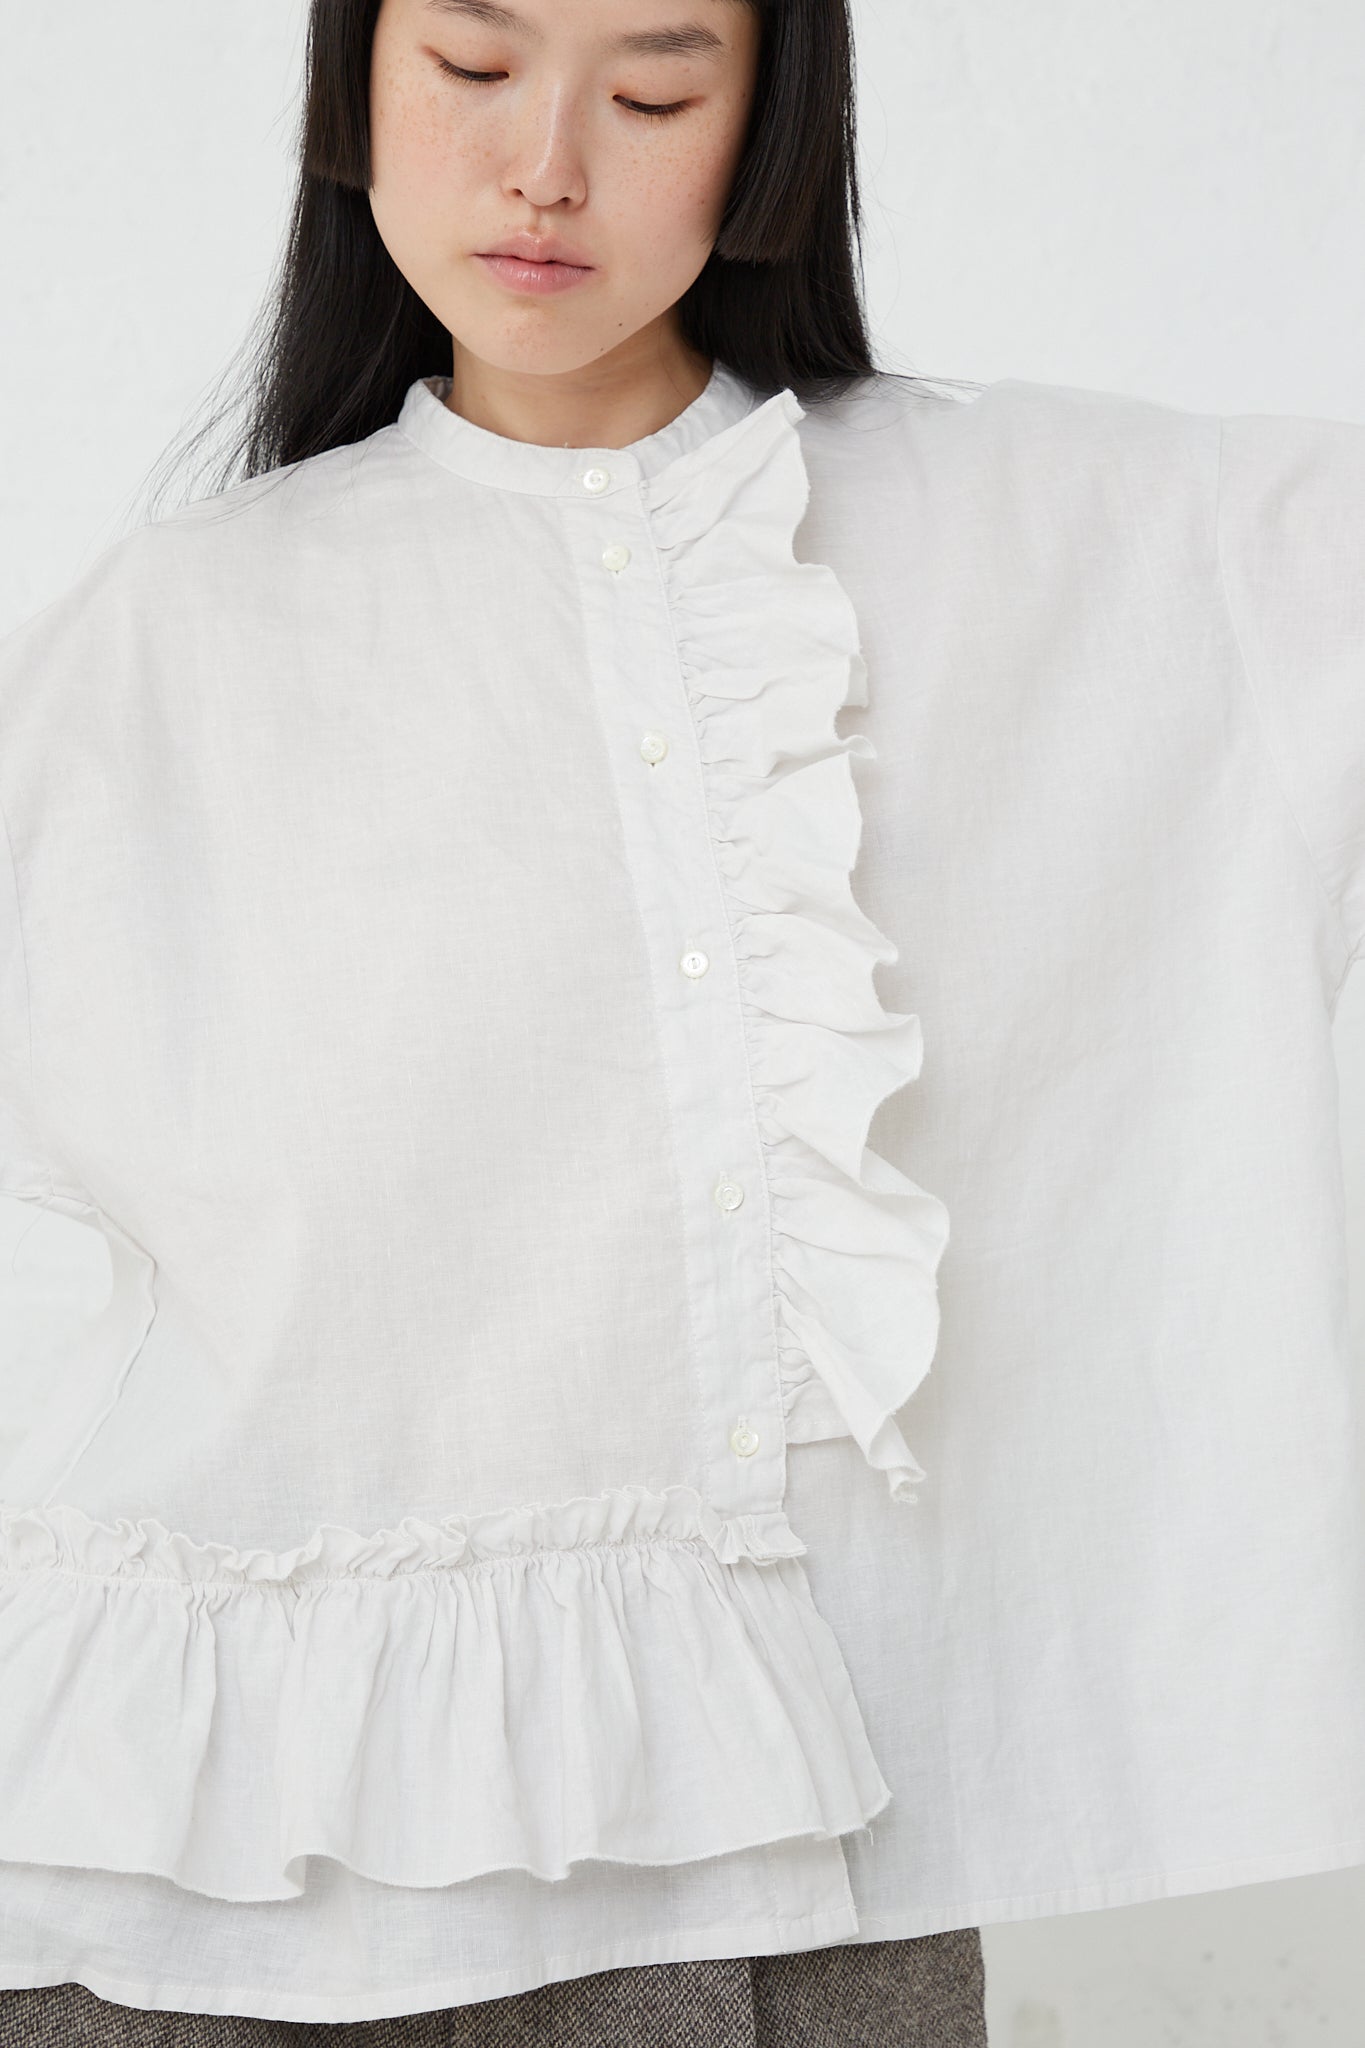 A woman wearing a nest Robe UpcycleLino Linen Gathered Frill Blouse in Off White with a front button closure.